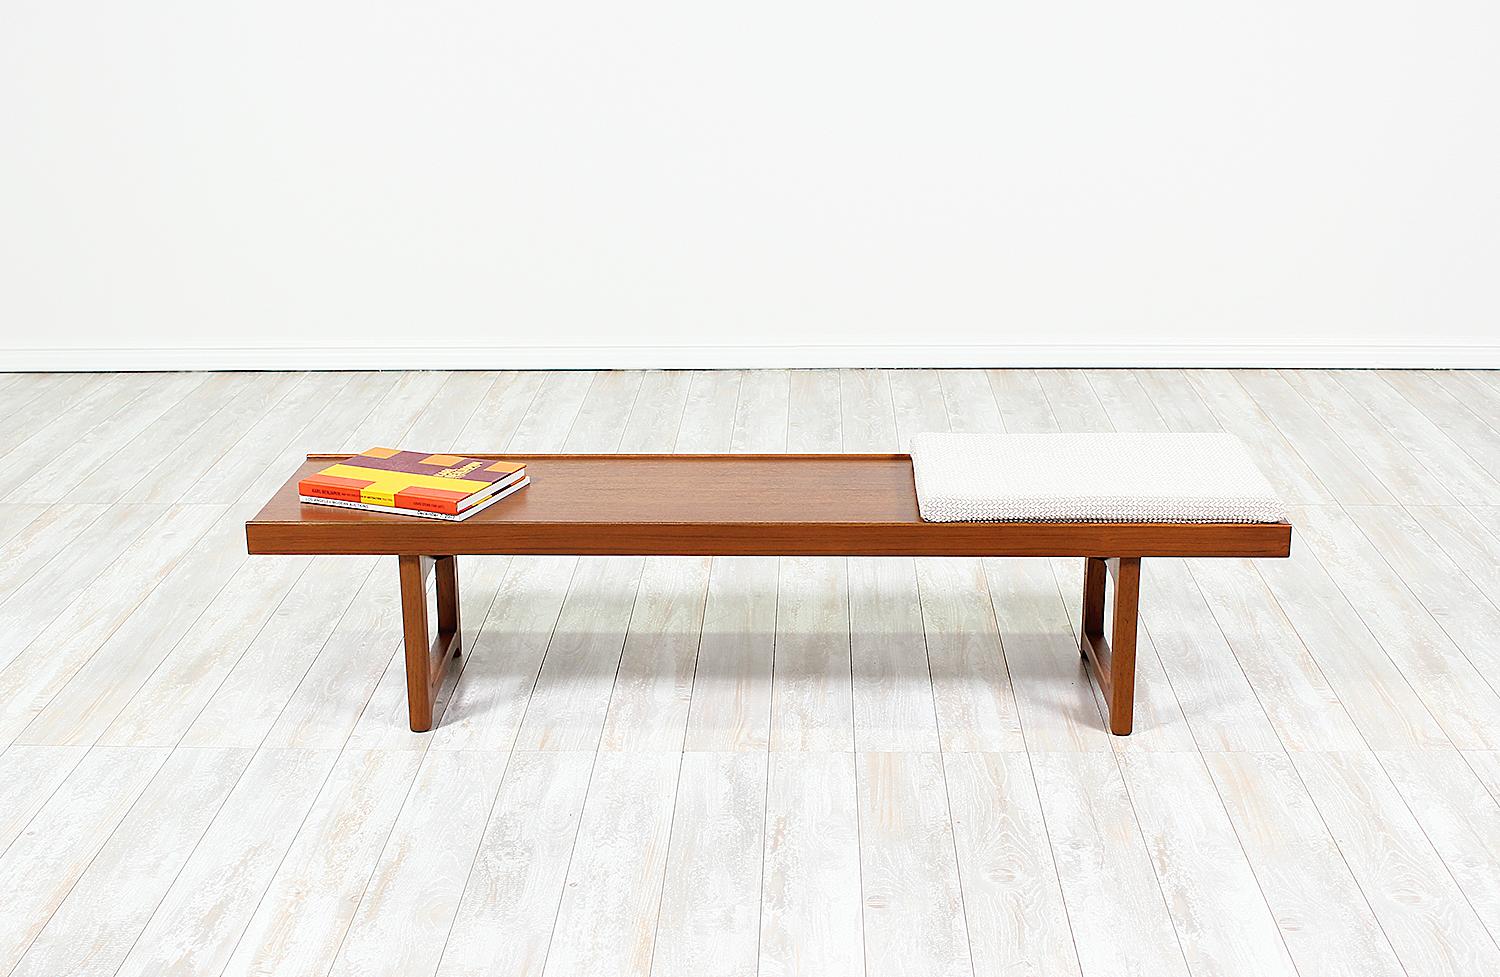 Bench or coffee table designed by Torbjørn Afdal for Bruksbo in Norway circa 1960s. A versatile and playful design featuring a beautiful and distinct teak wood grain over the rectangular, raised lip top and supported by sculpted geometric legs. Its